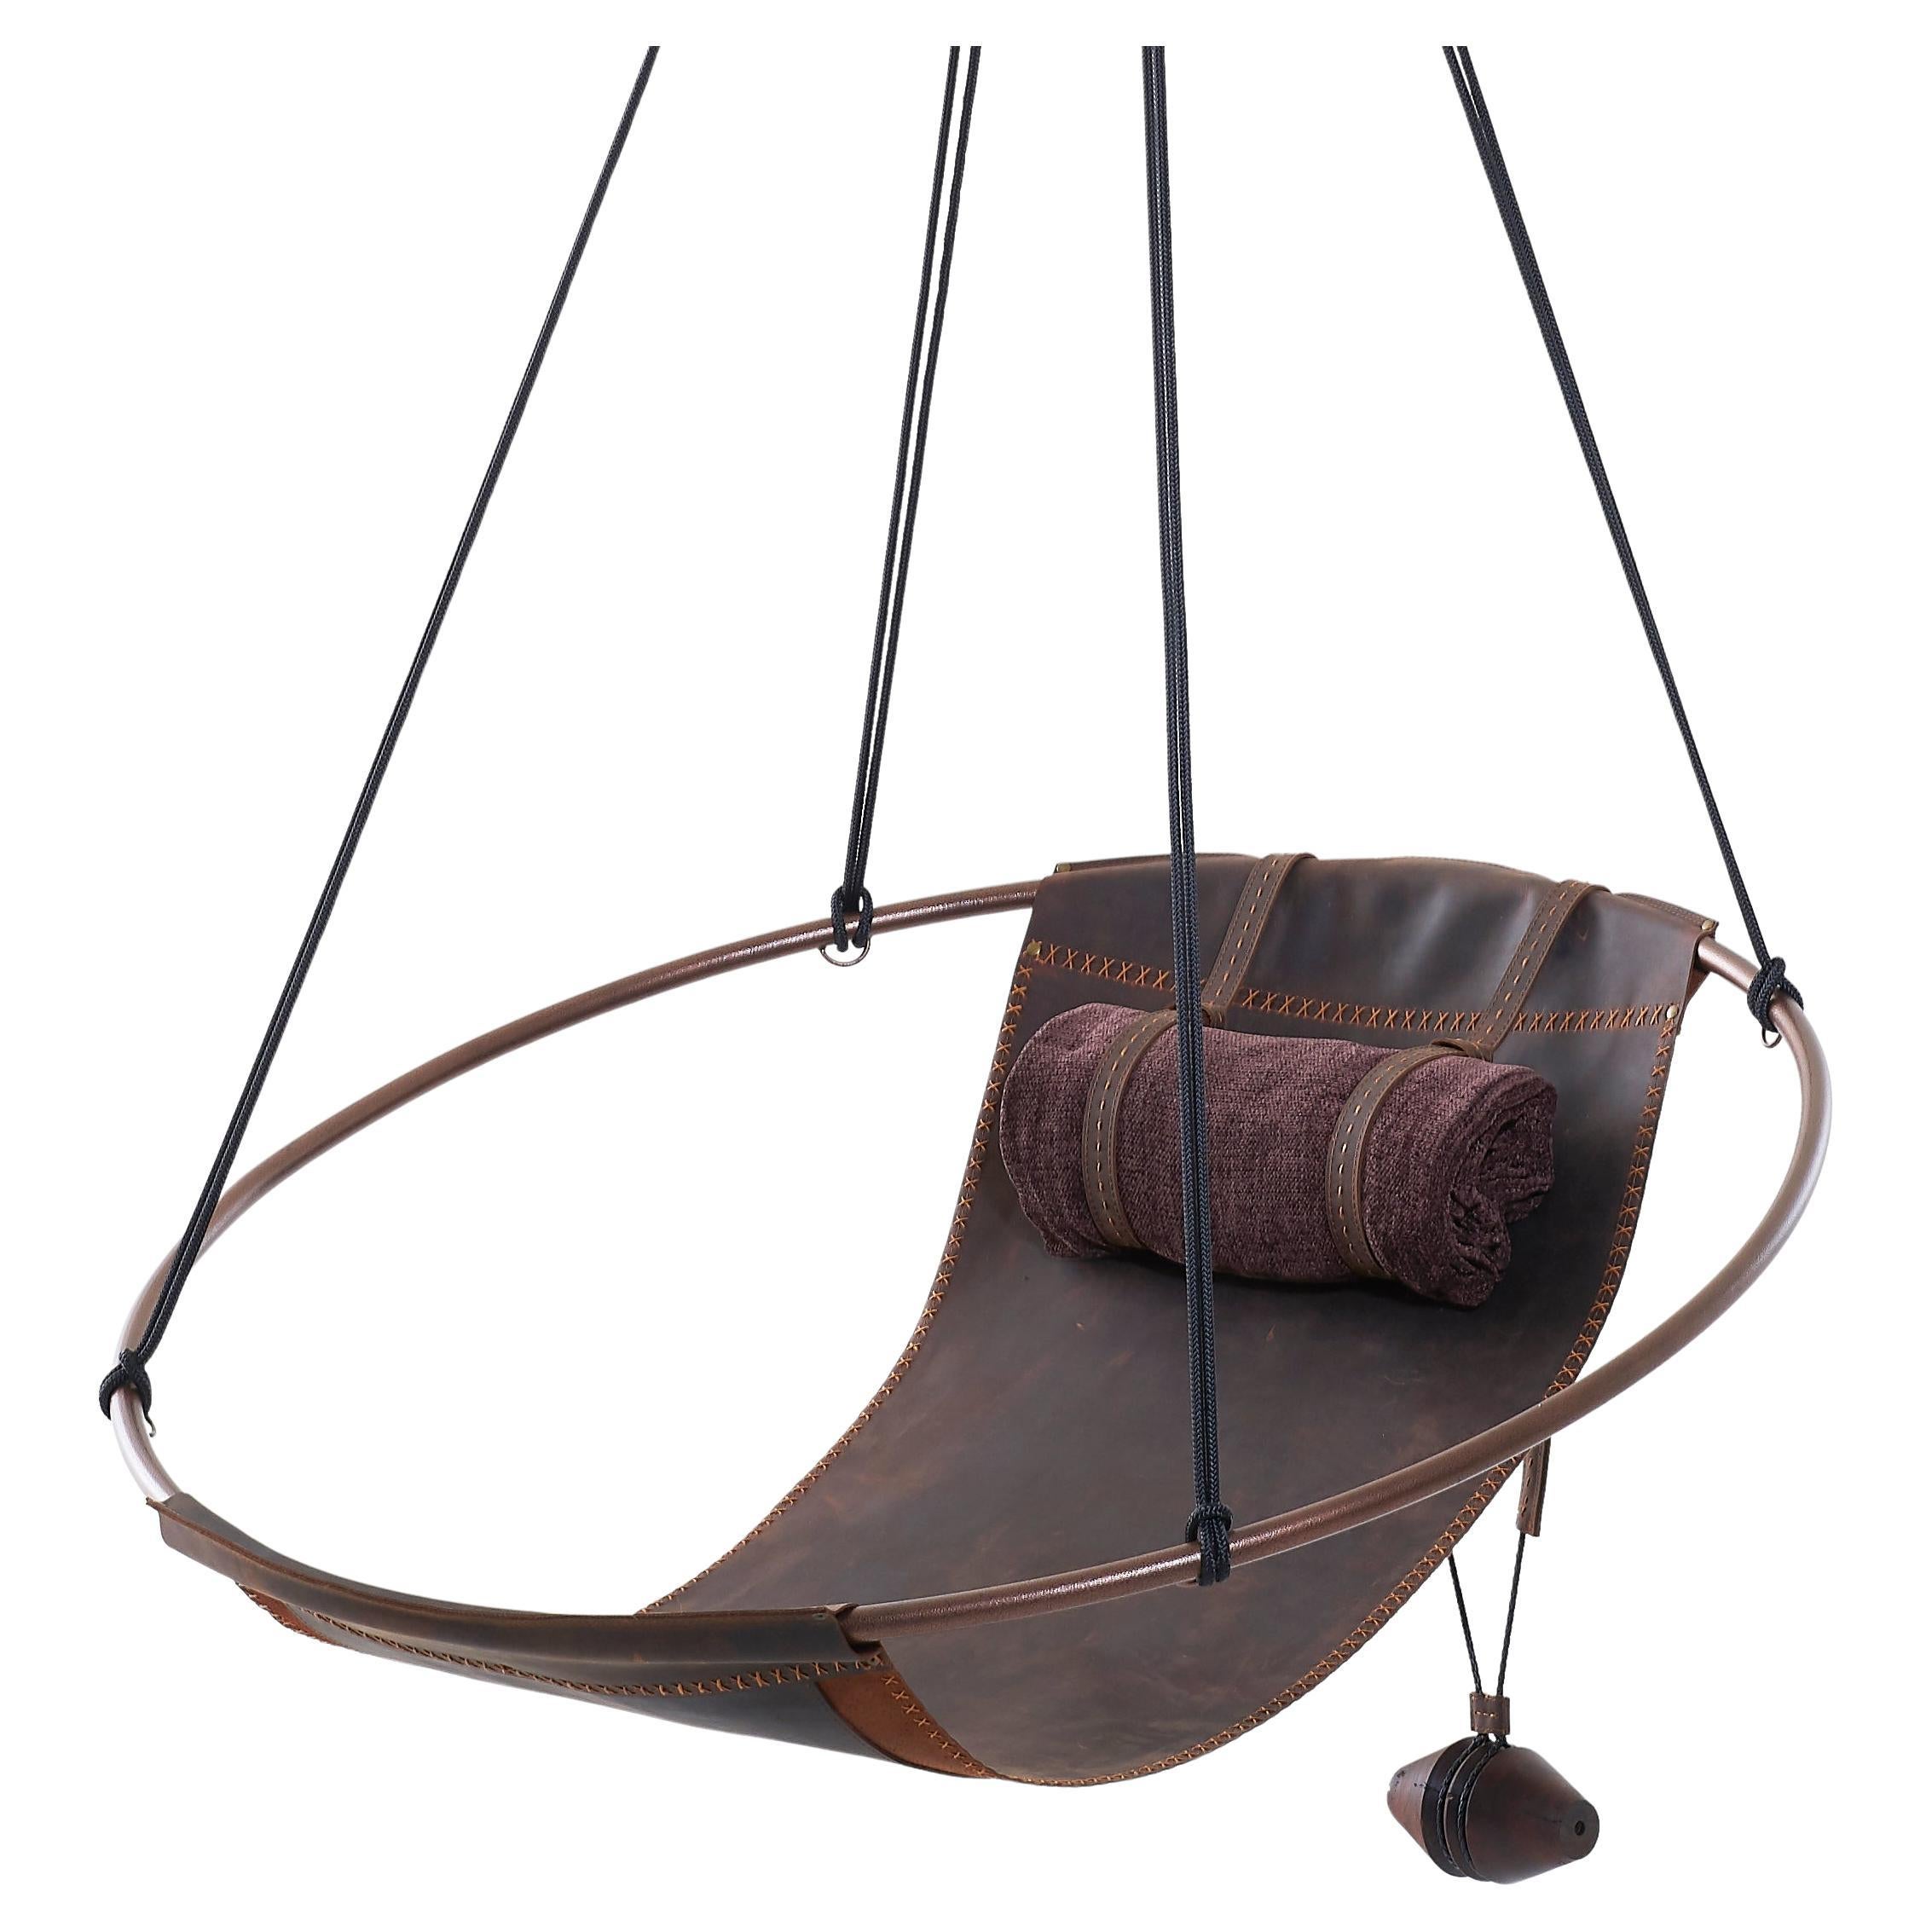 Oil Tanned Genuine Leather Suspended Chair